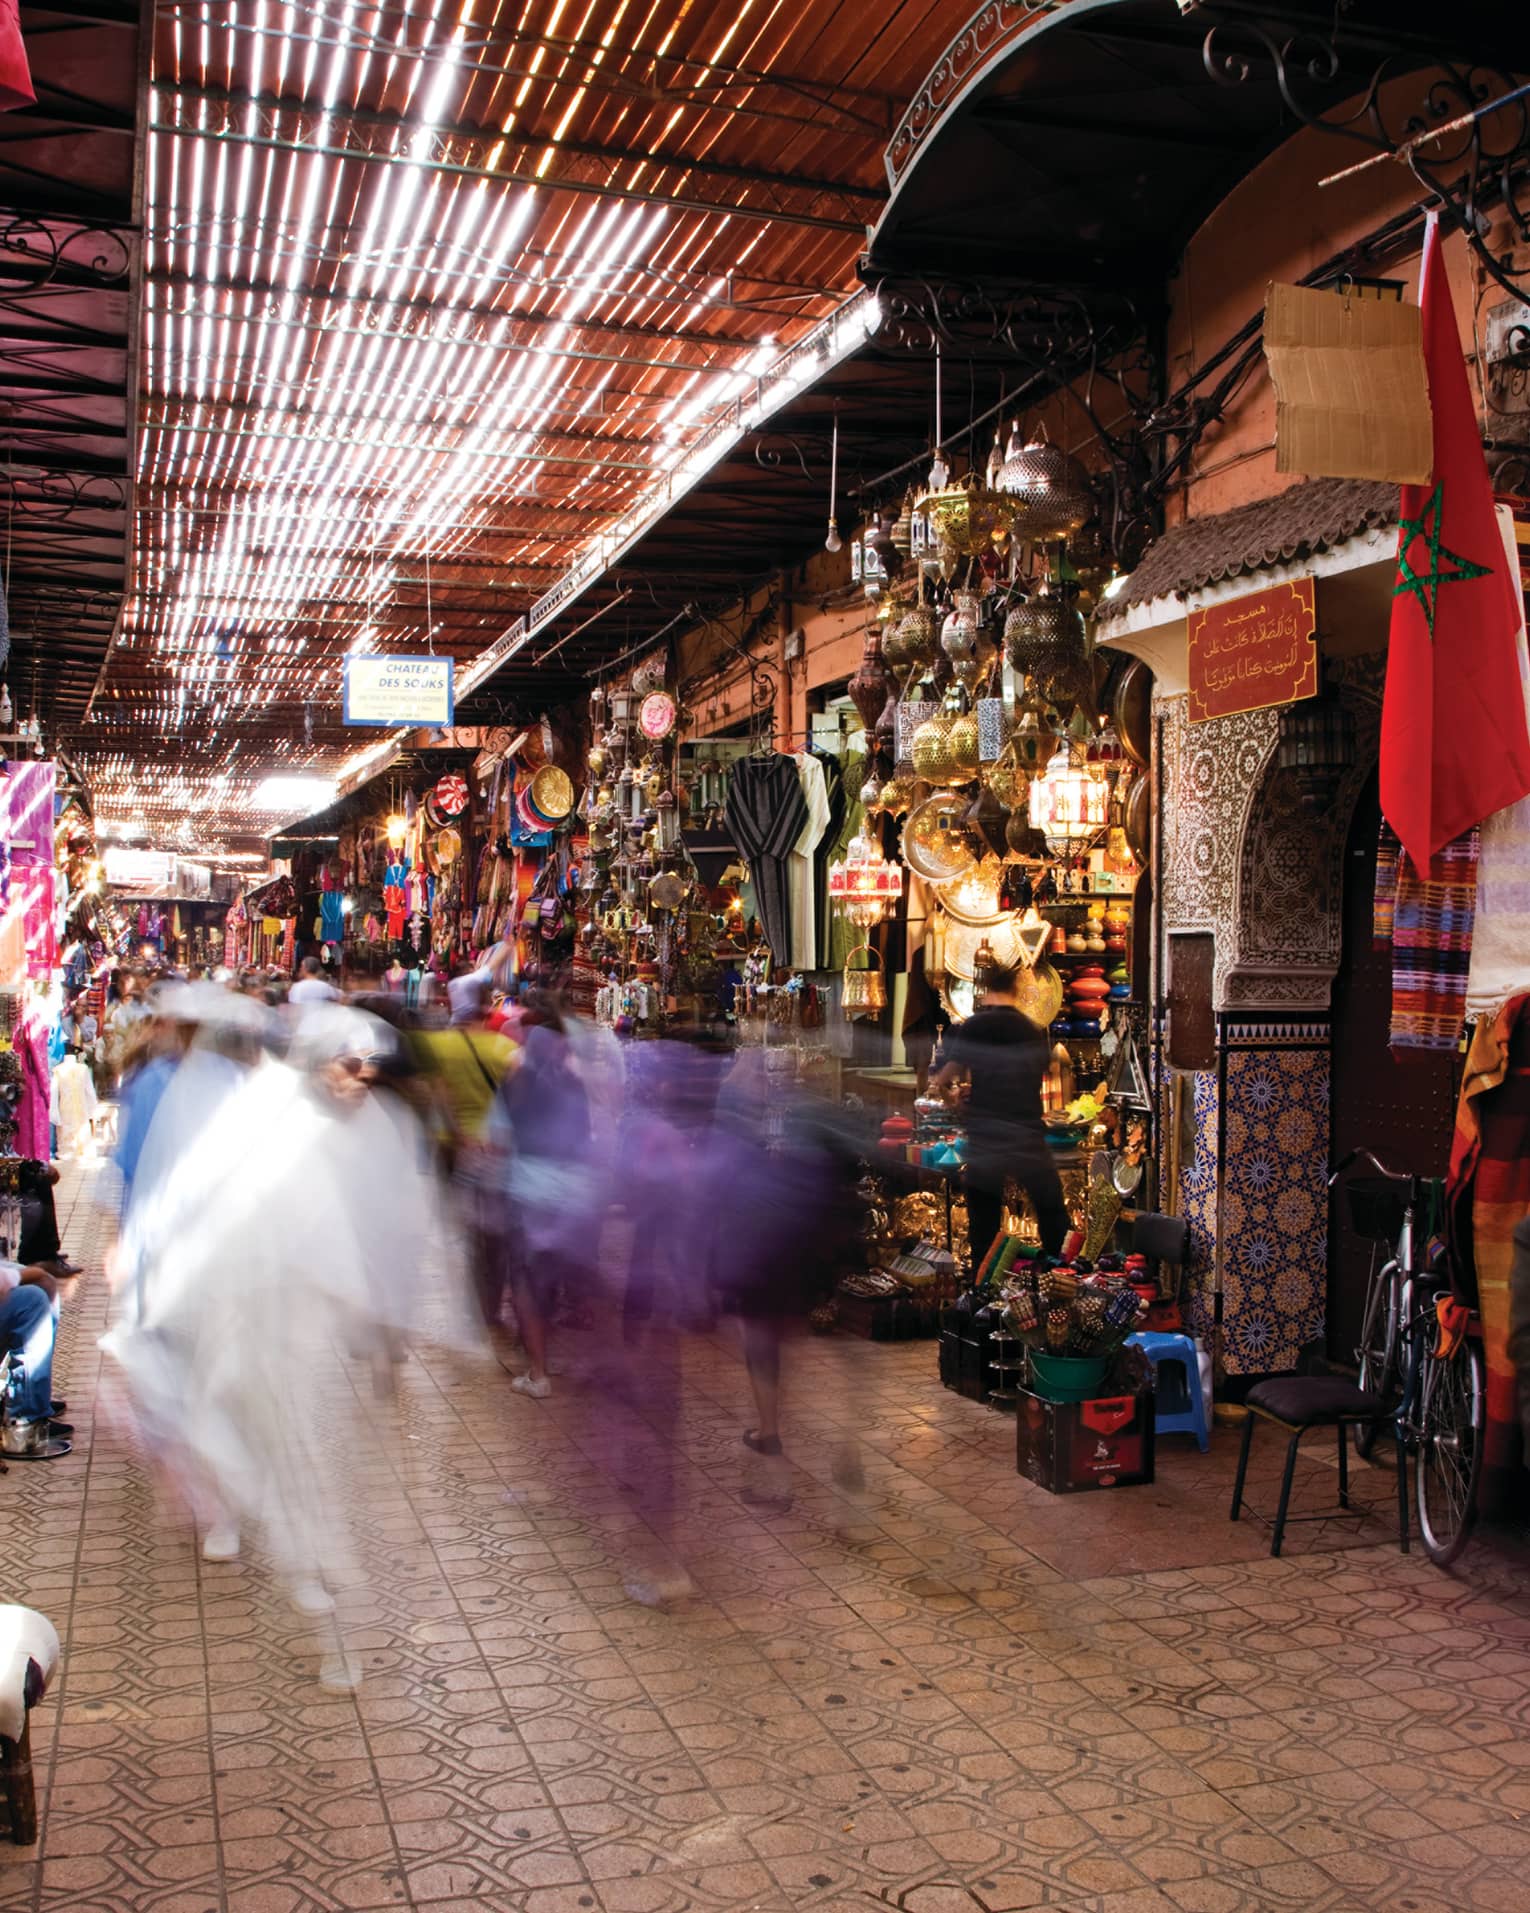 People walk through Moroccan market with stalls filled with colourful textiles, treasures